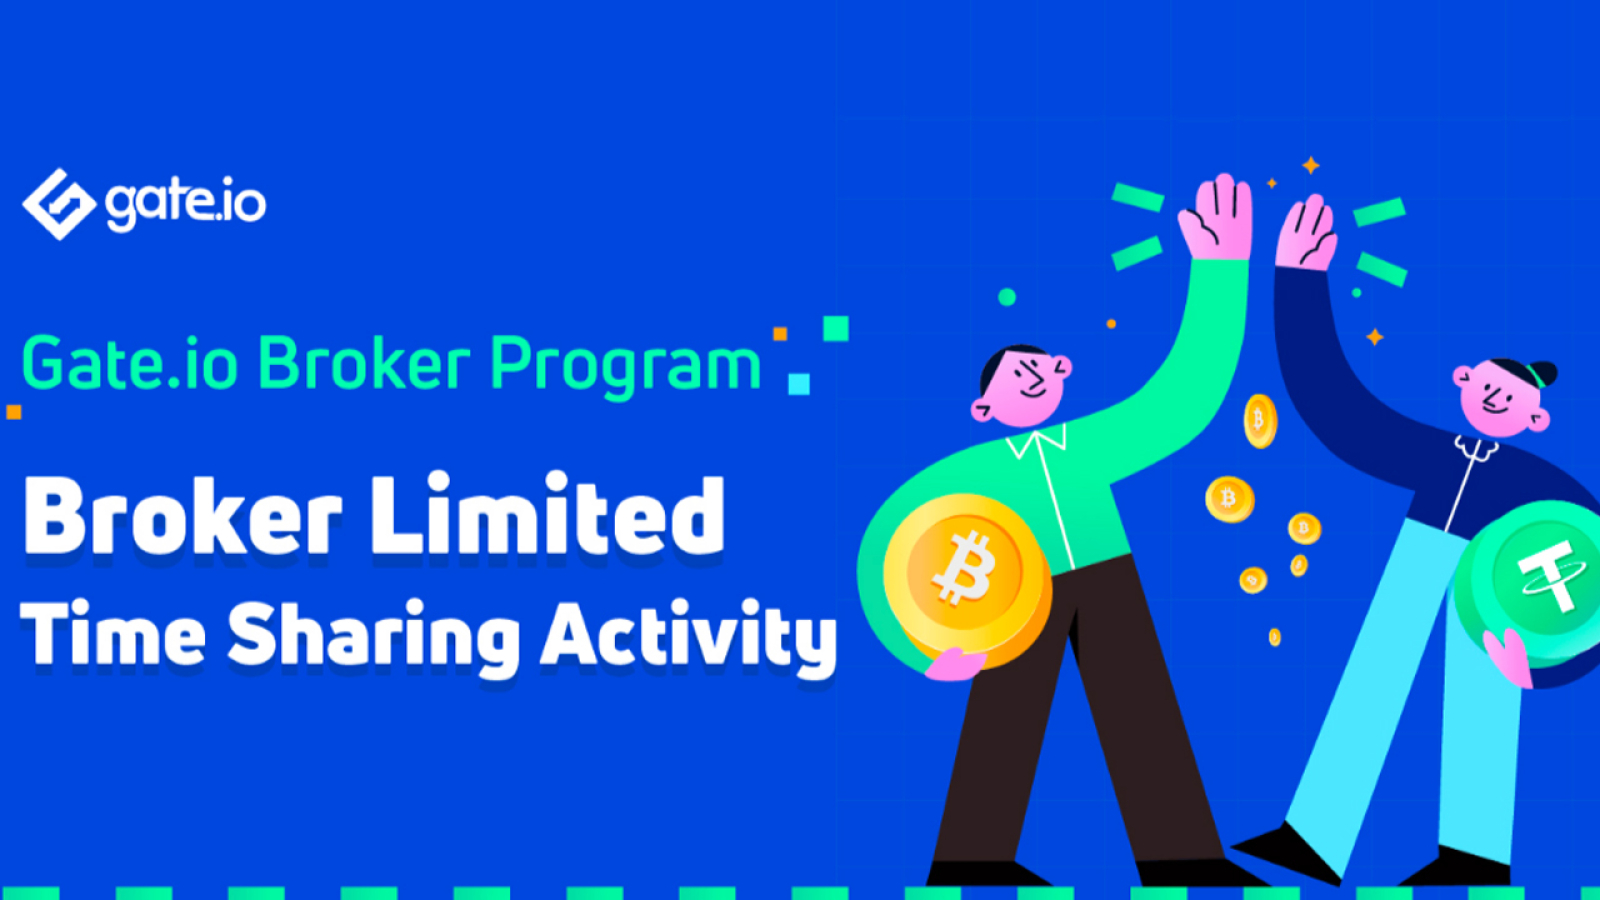 Gate.io Introduces Limited-Time Broker Sharing Activity